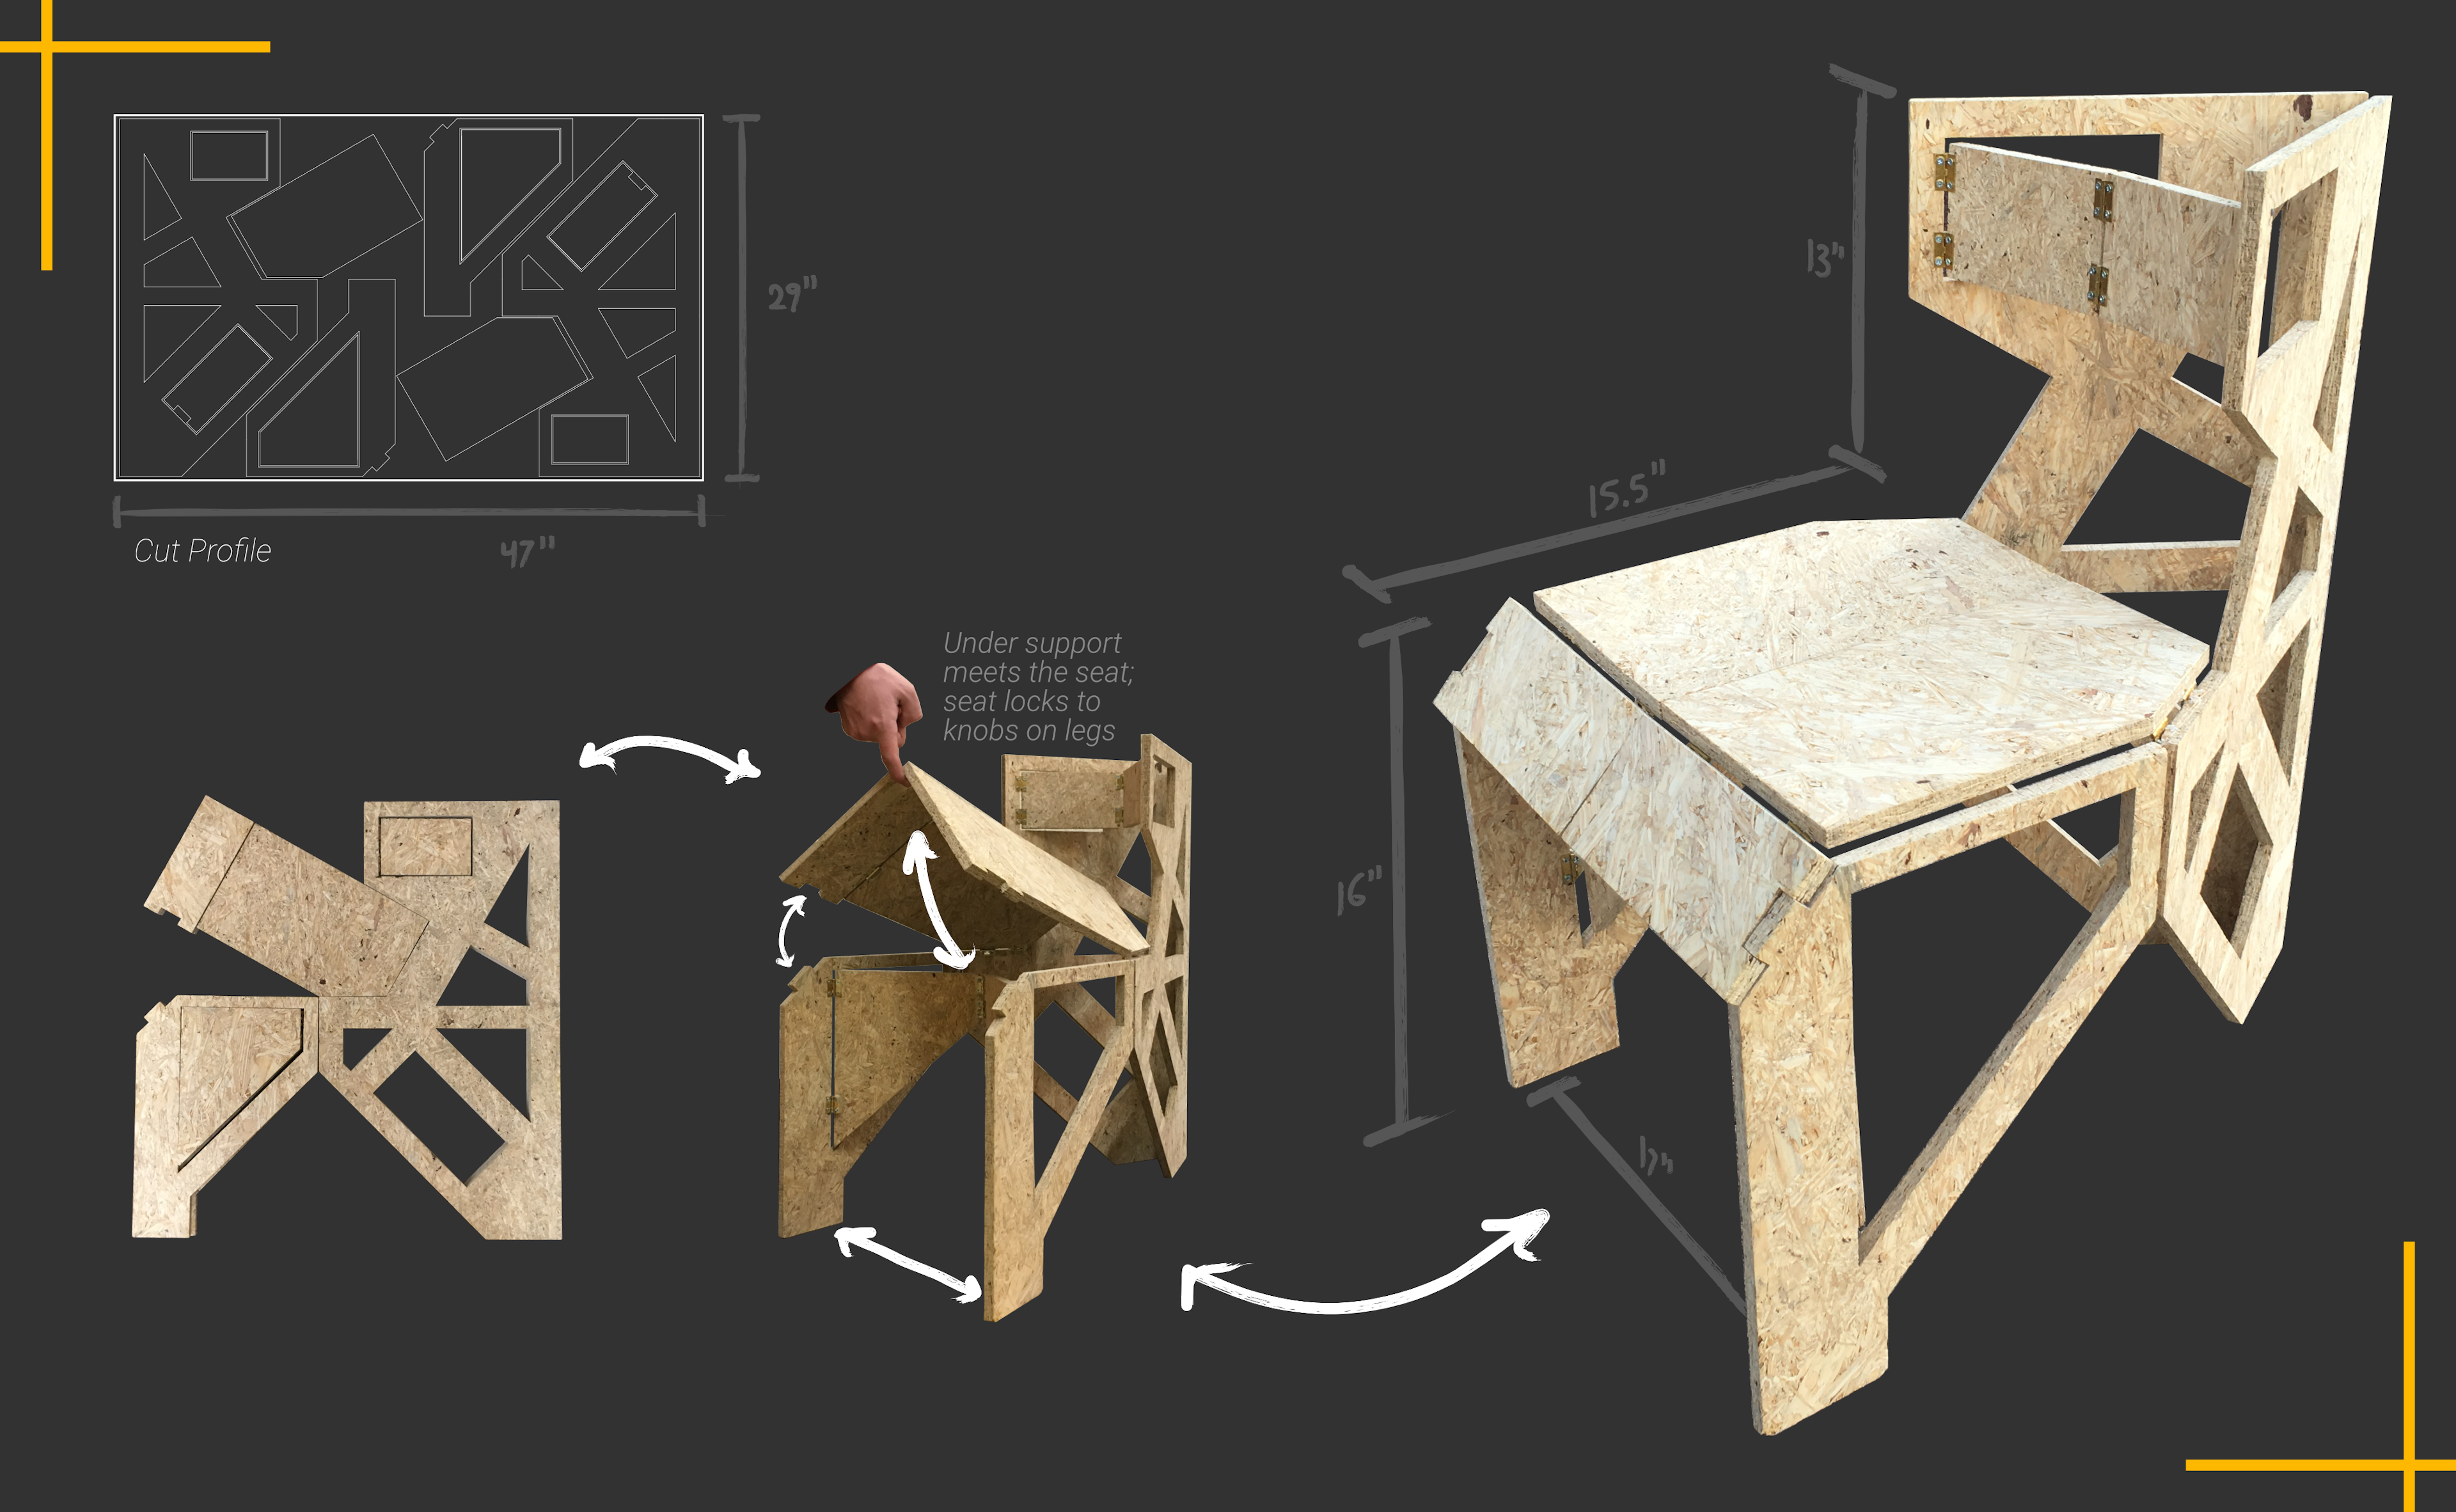 Our final design showing the chair unfolding. Also shown: the water-jet cut pattern that created the chair.